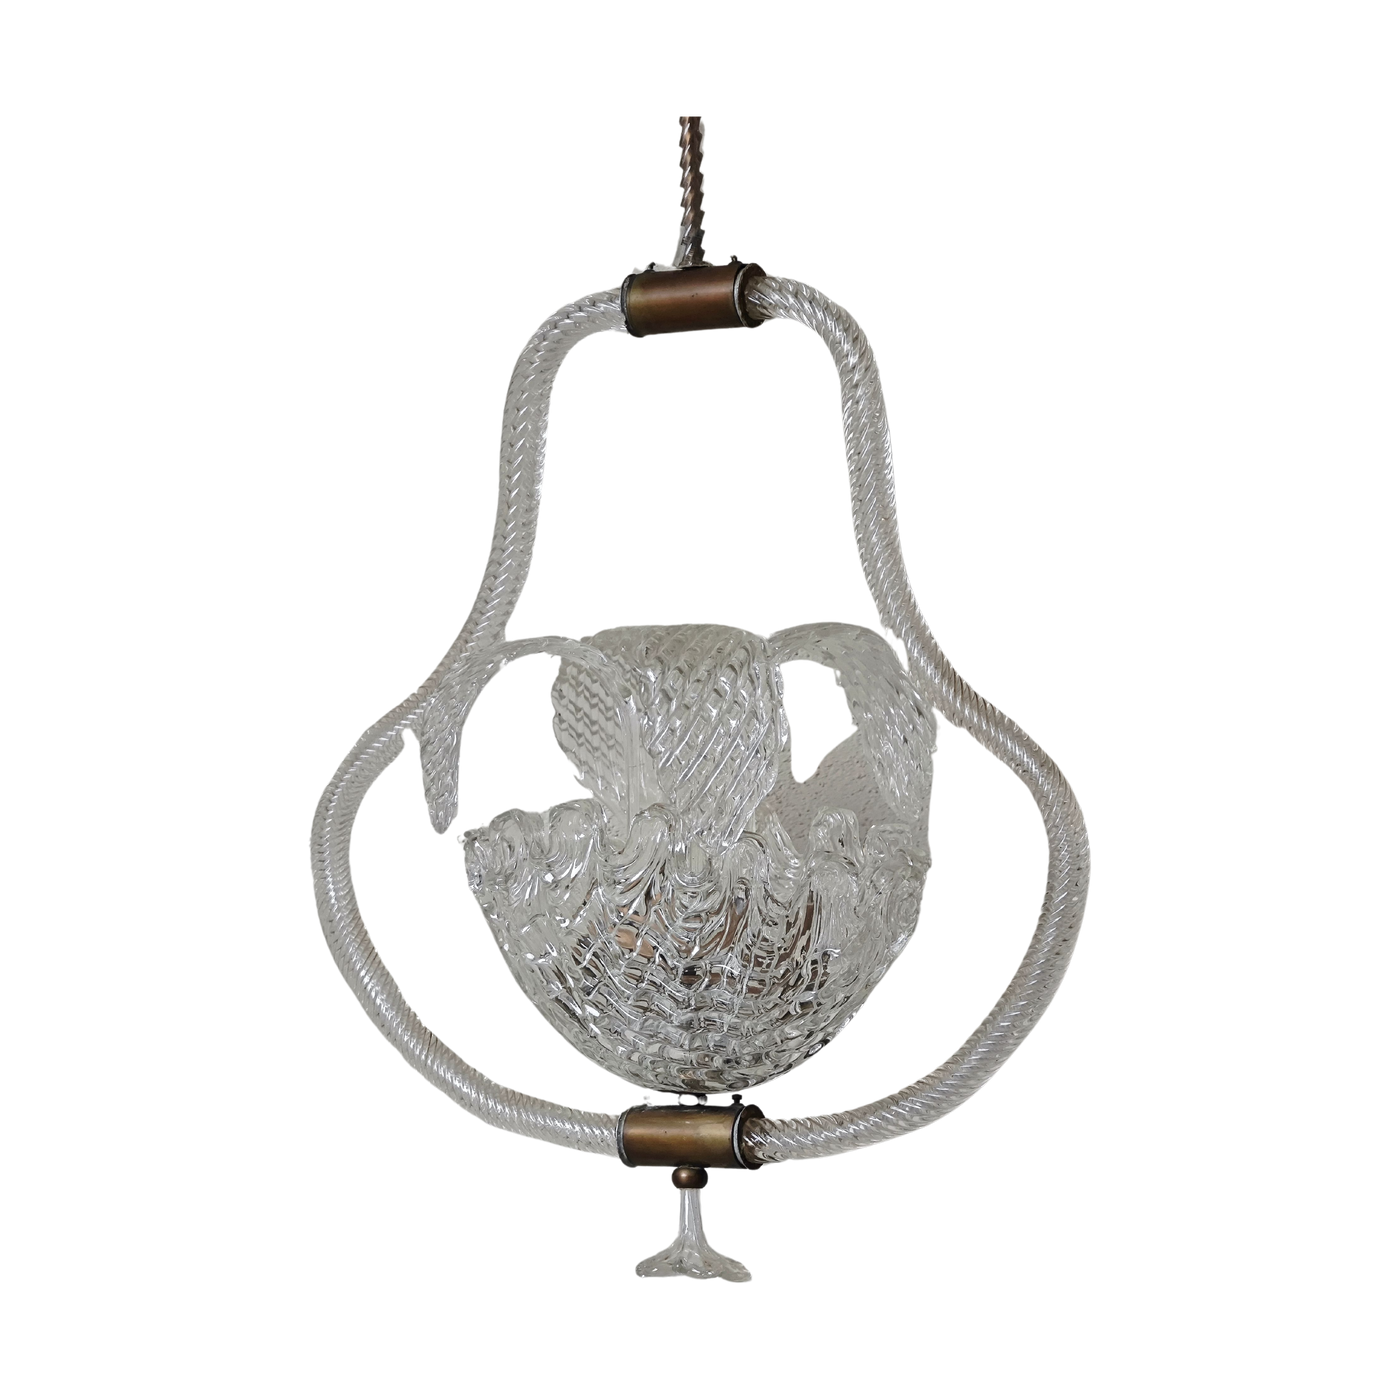 #5045 - Barovier glass pendant with 4 leaves